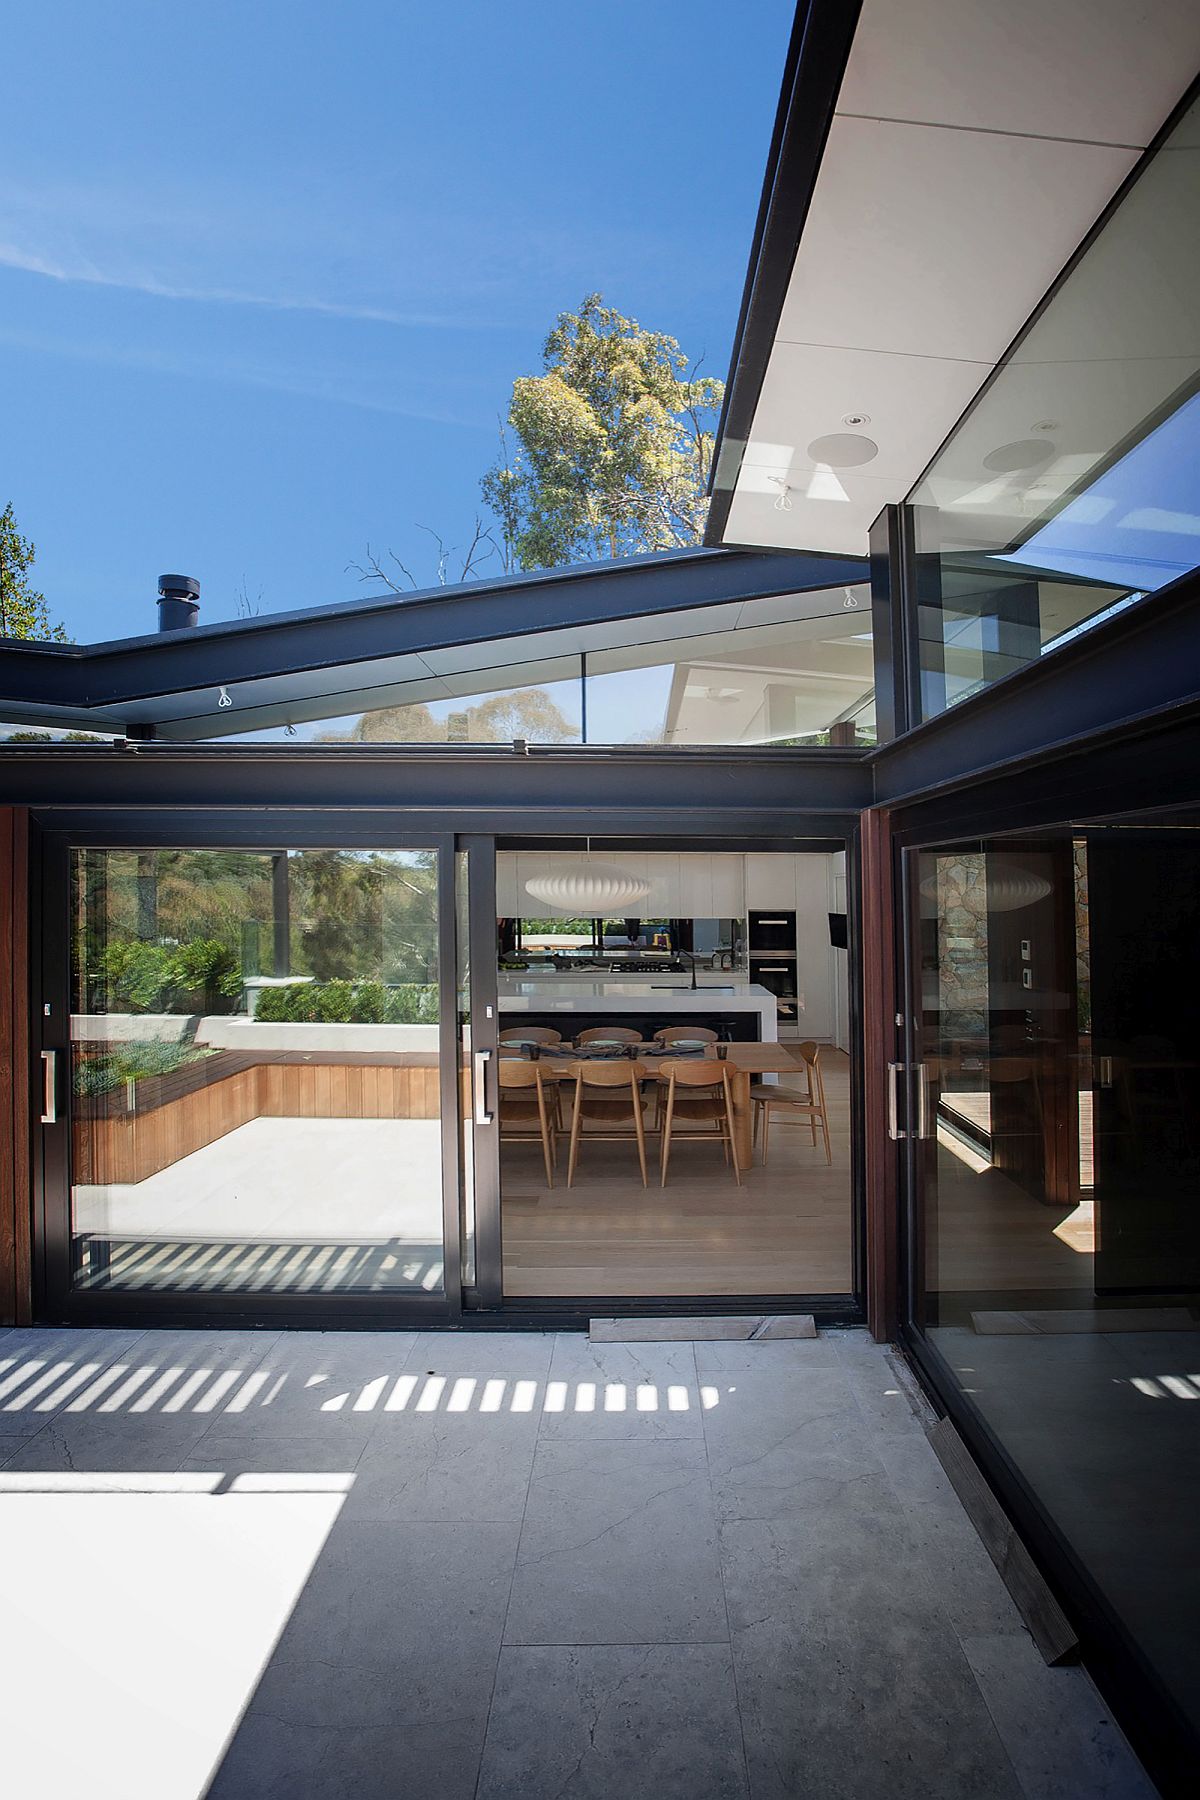 Central courtyard space created by the twin structures of the Aussie home